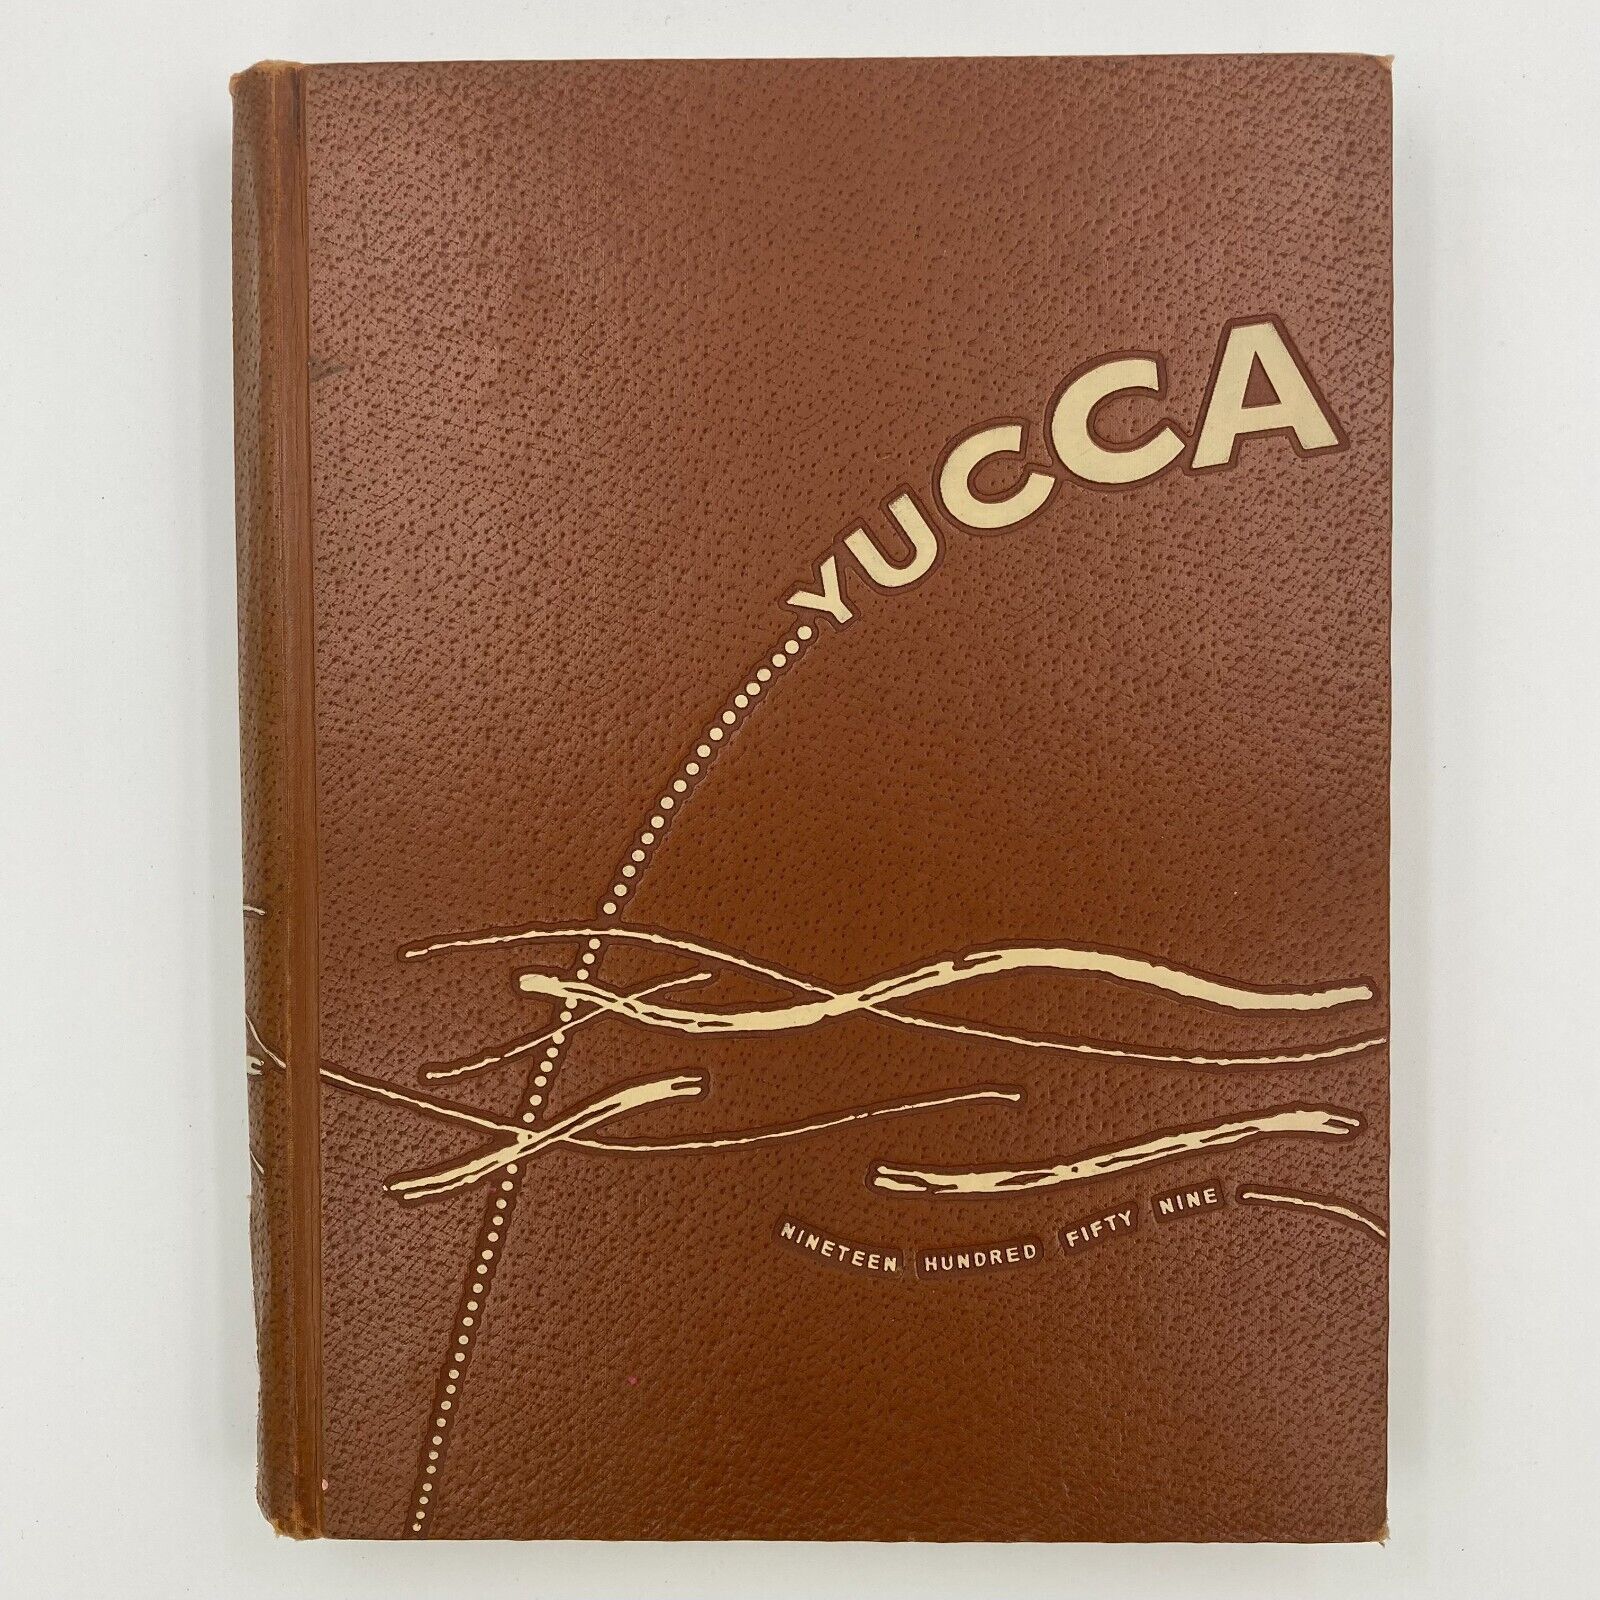 1959 North Texas State University Denton Texas Yucca Yearbook Annual College